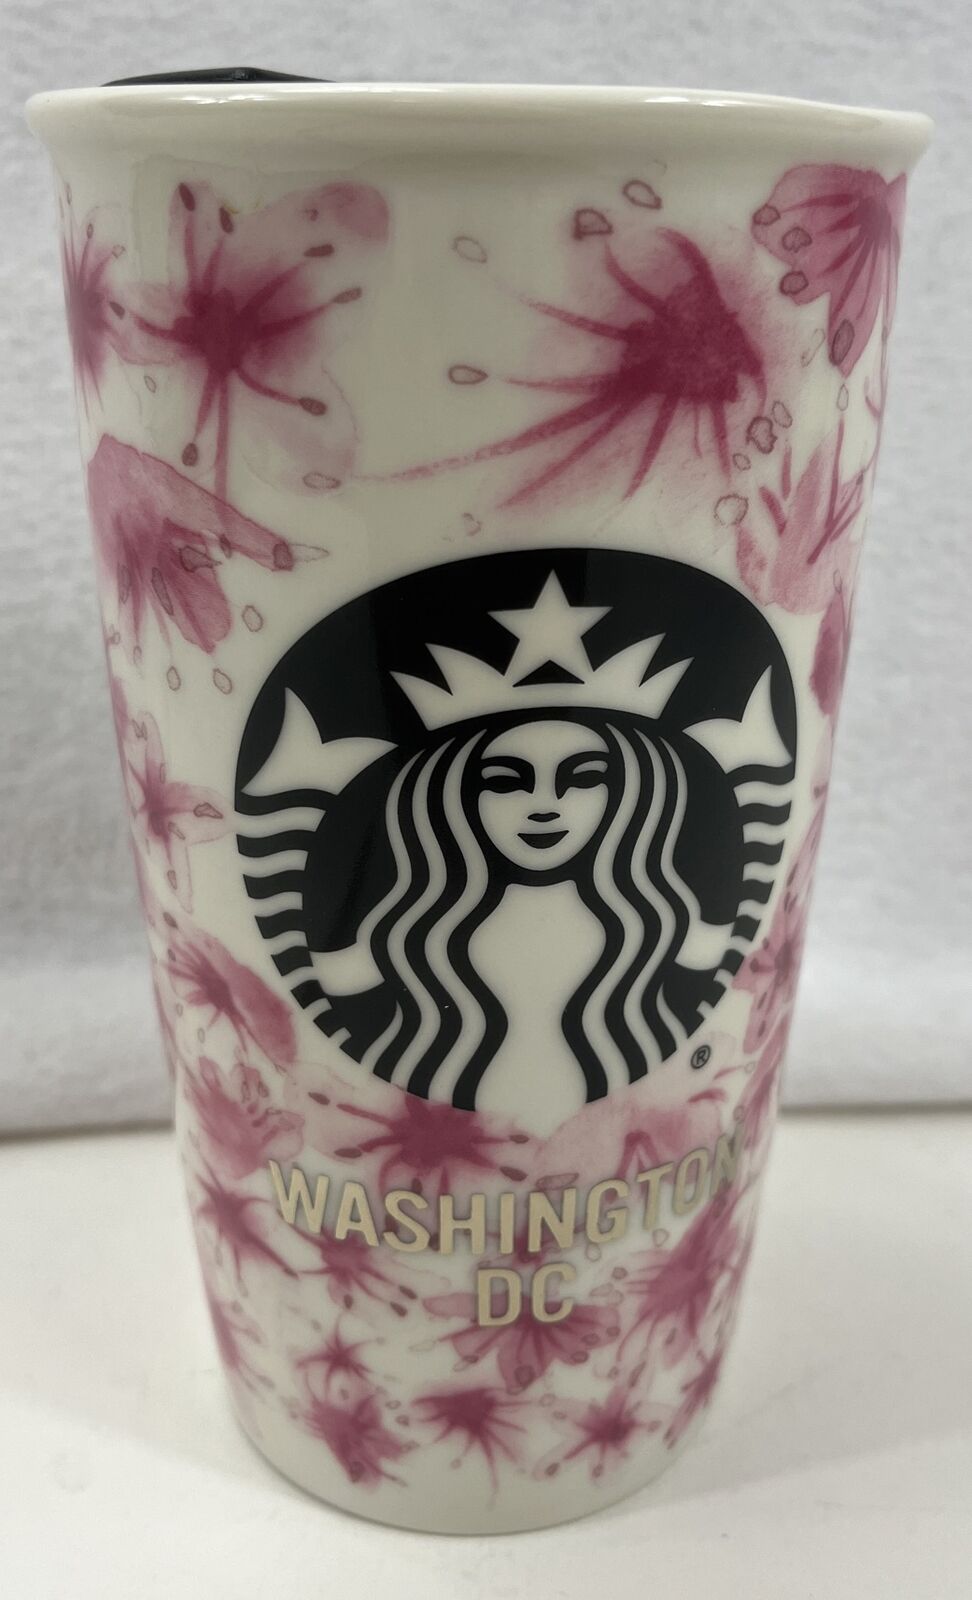 2016 Starbucks Washington DC Cherry Blossom 12 Ounce Ceramic Coffee Cup With Lid